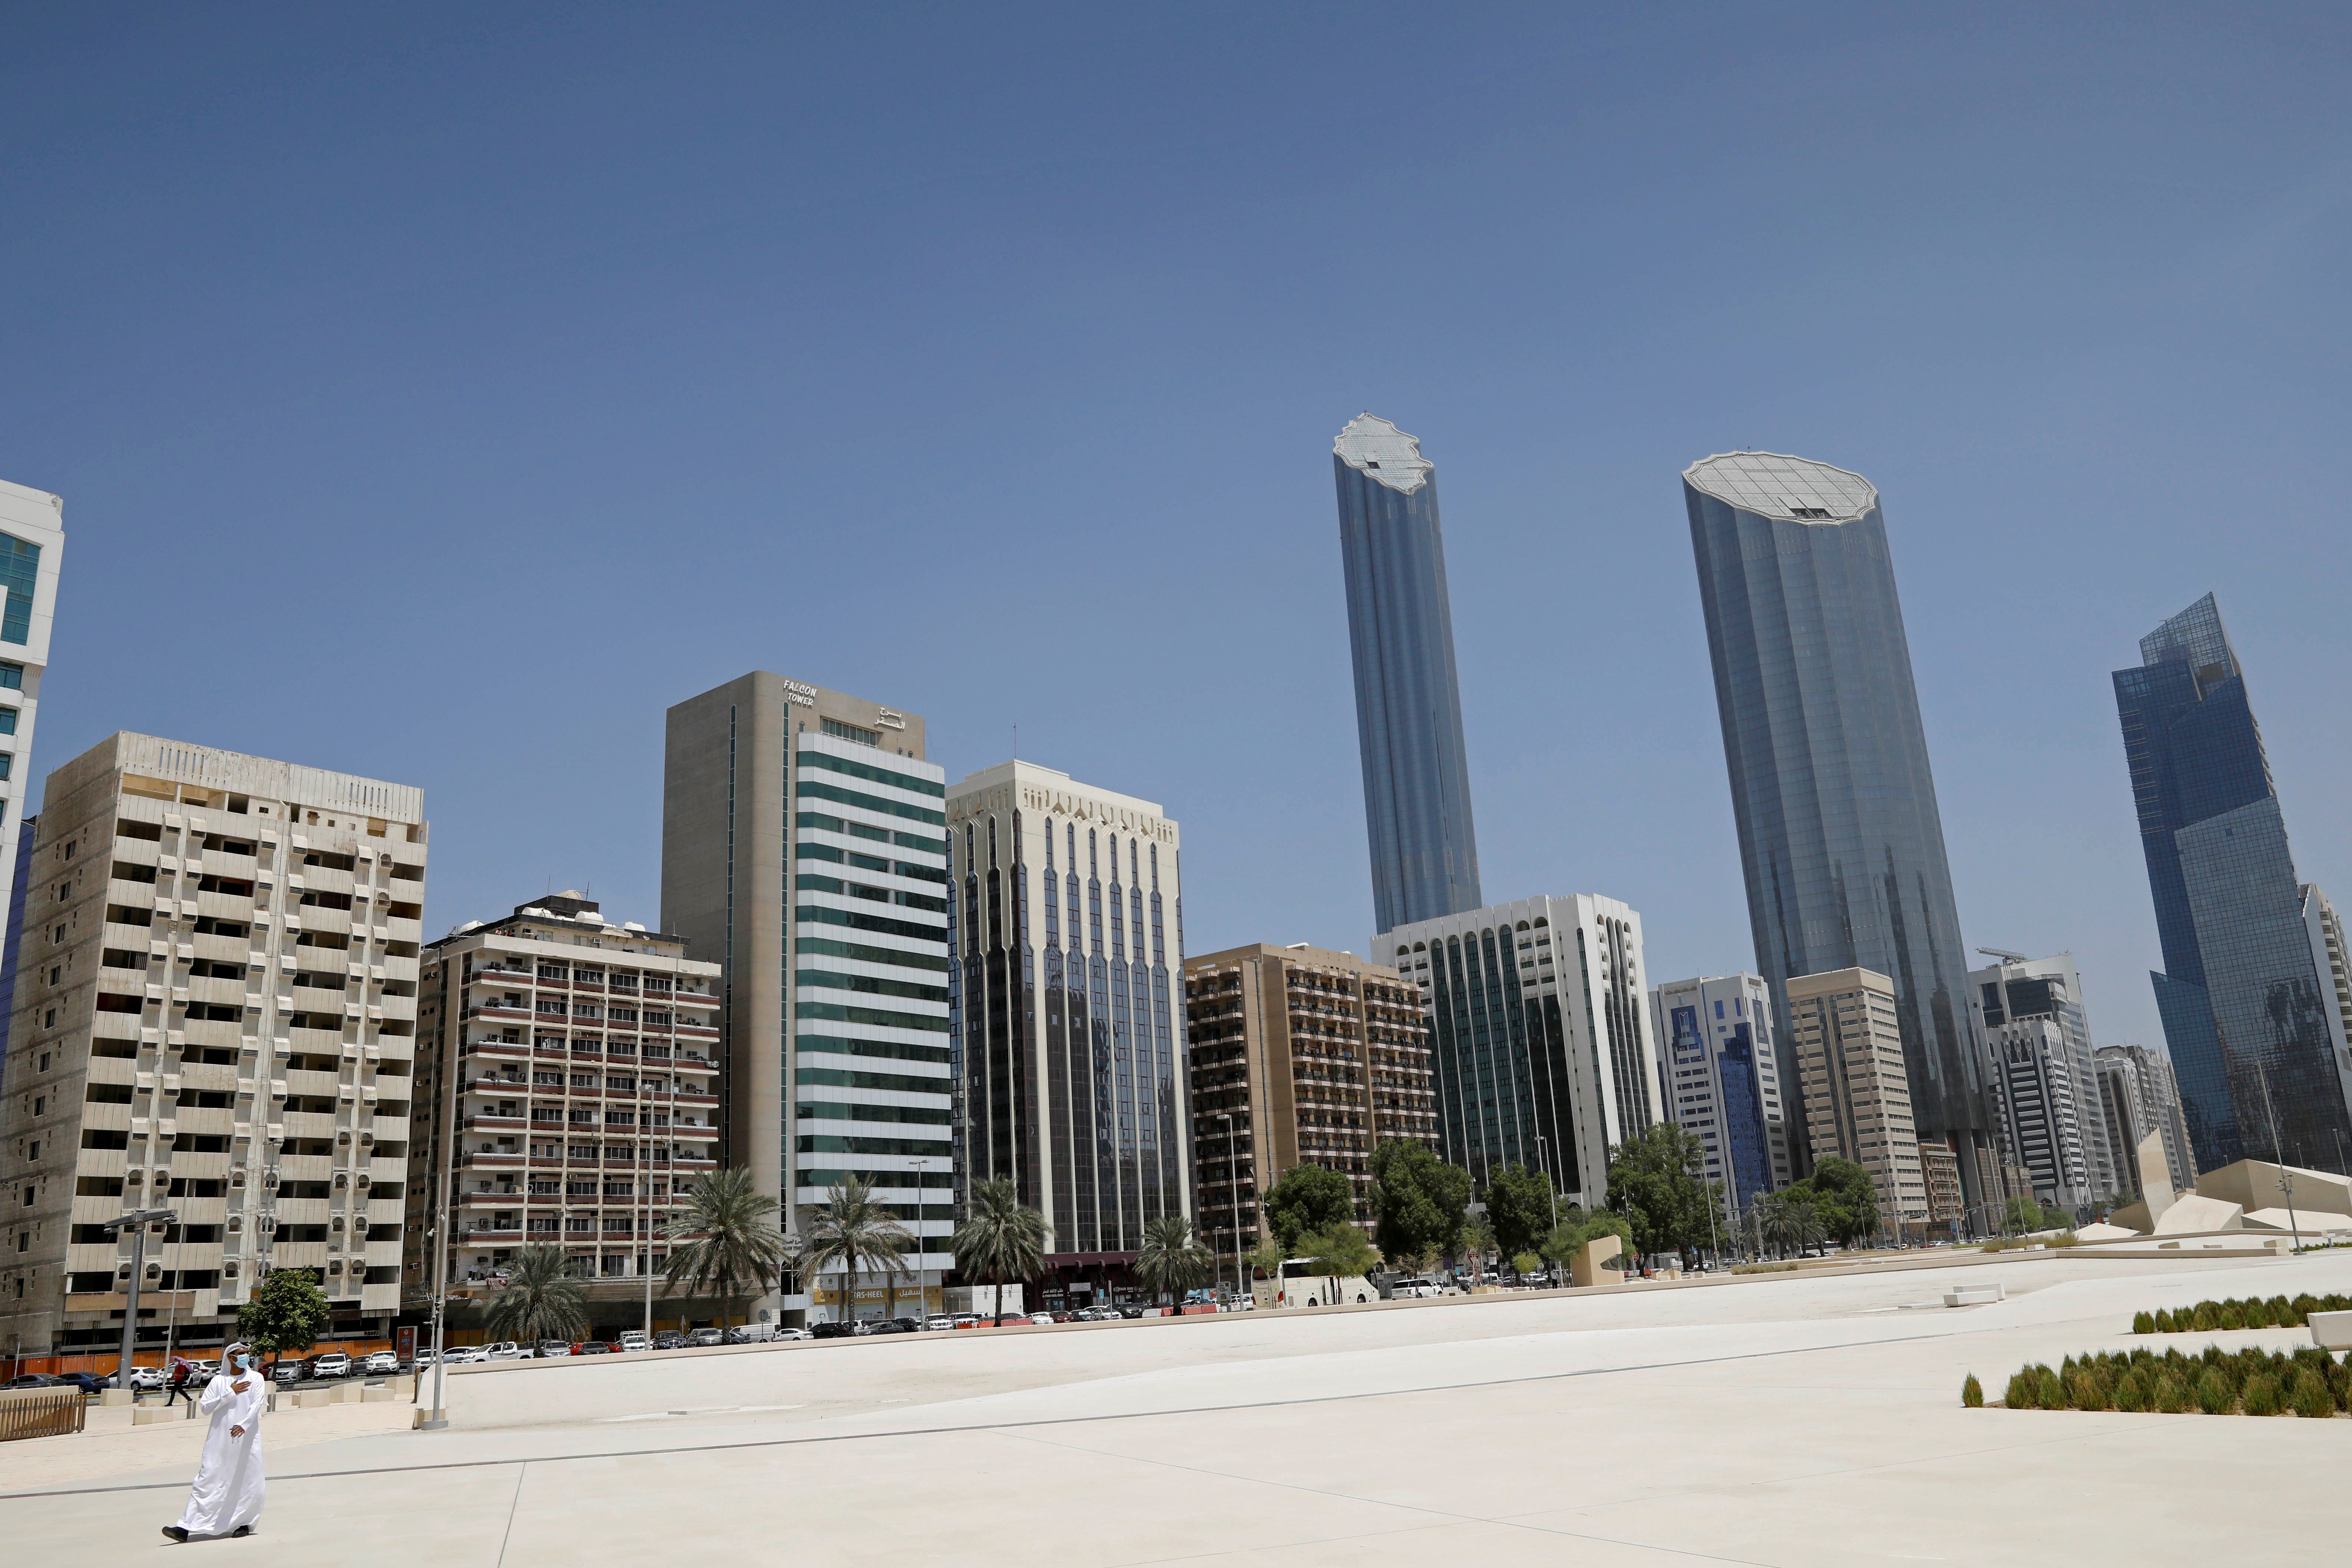 Abu Dhabi restricts many public areas to those free of COVID-19